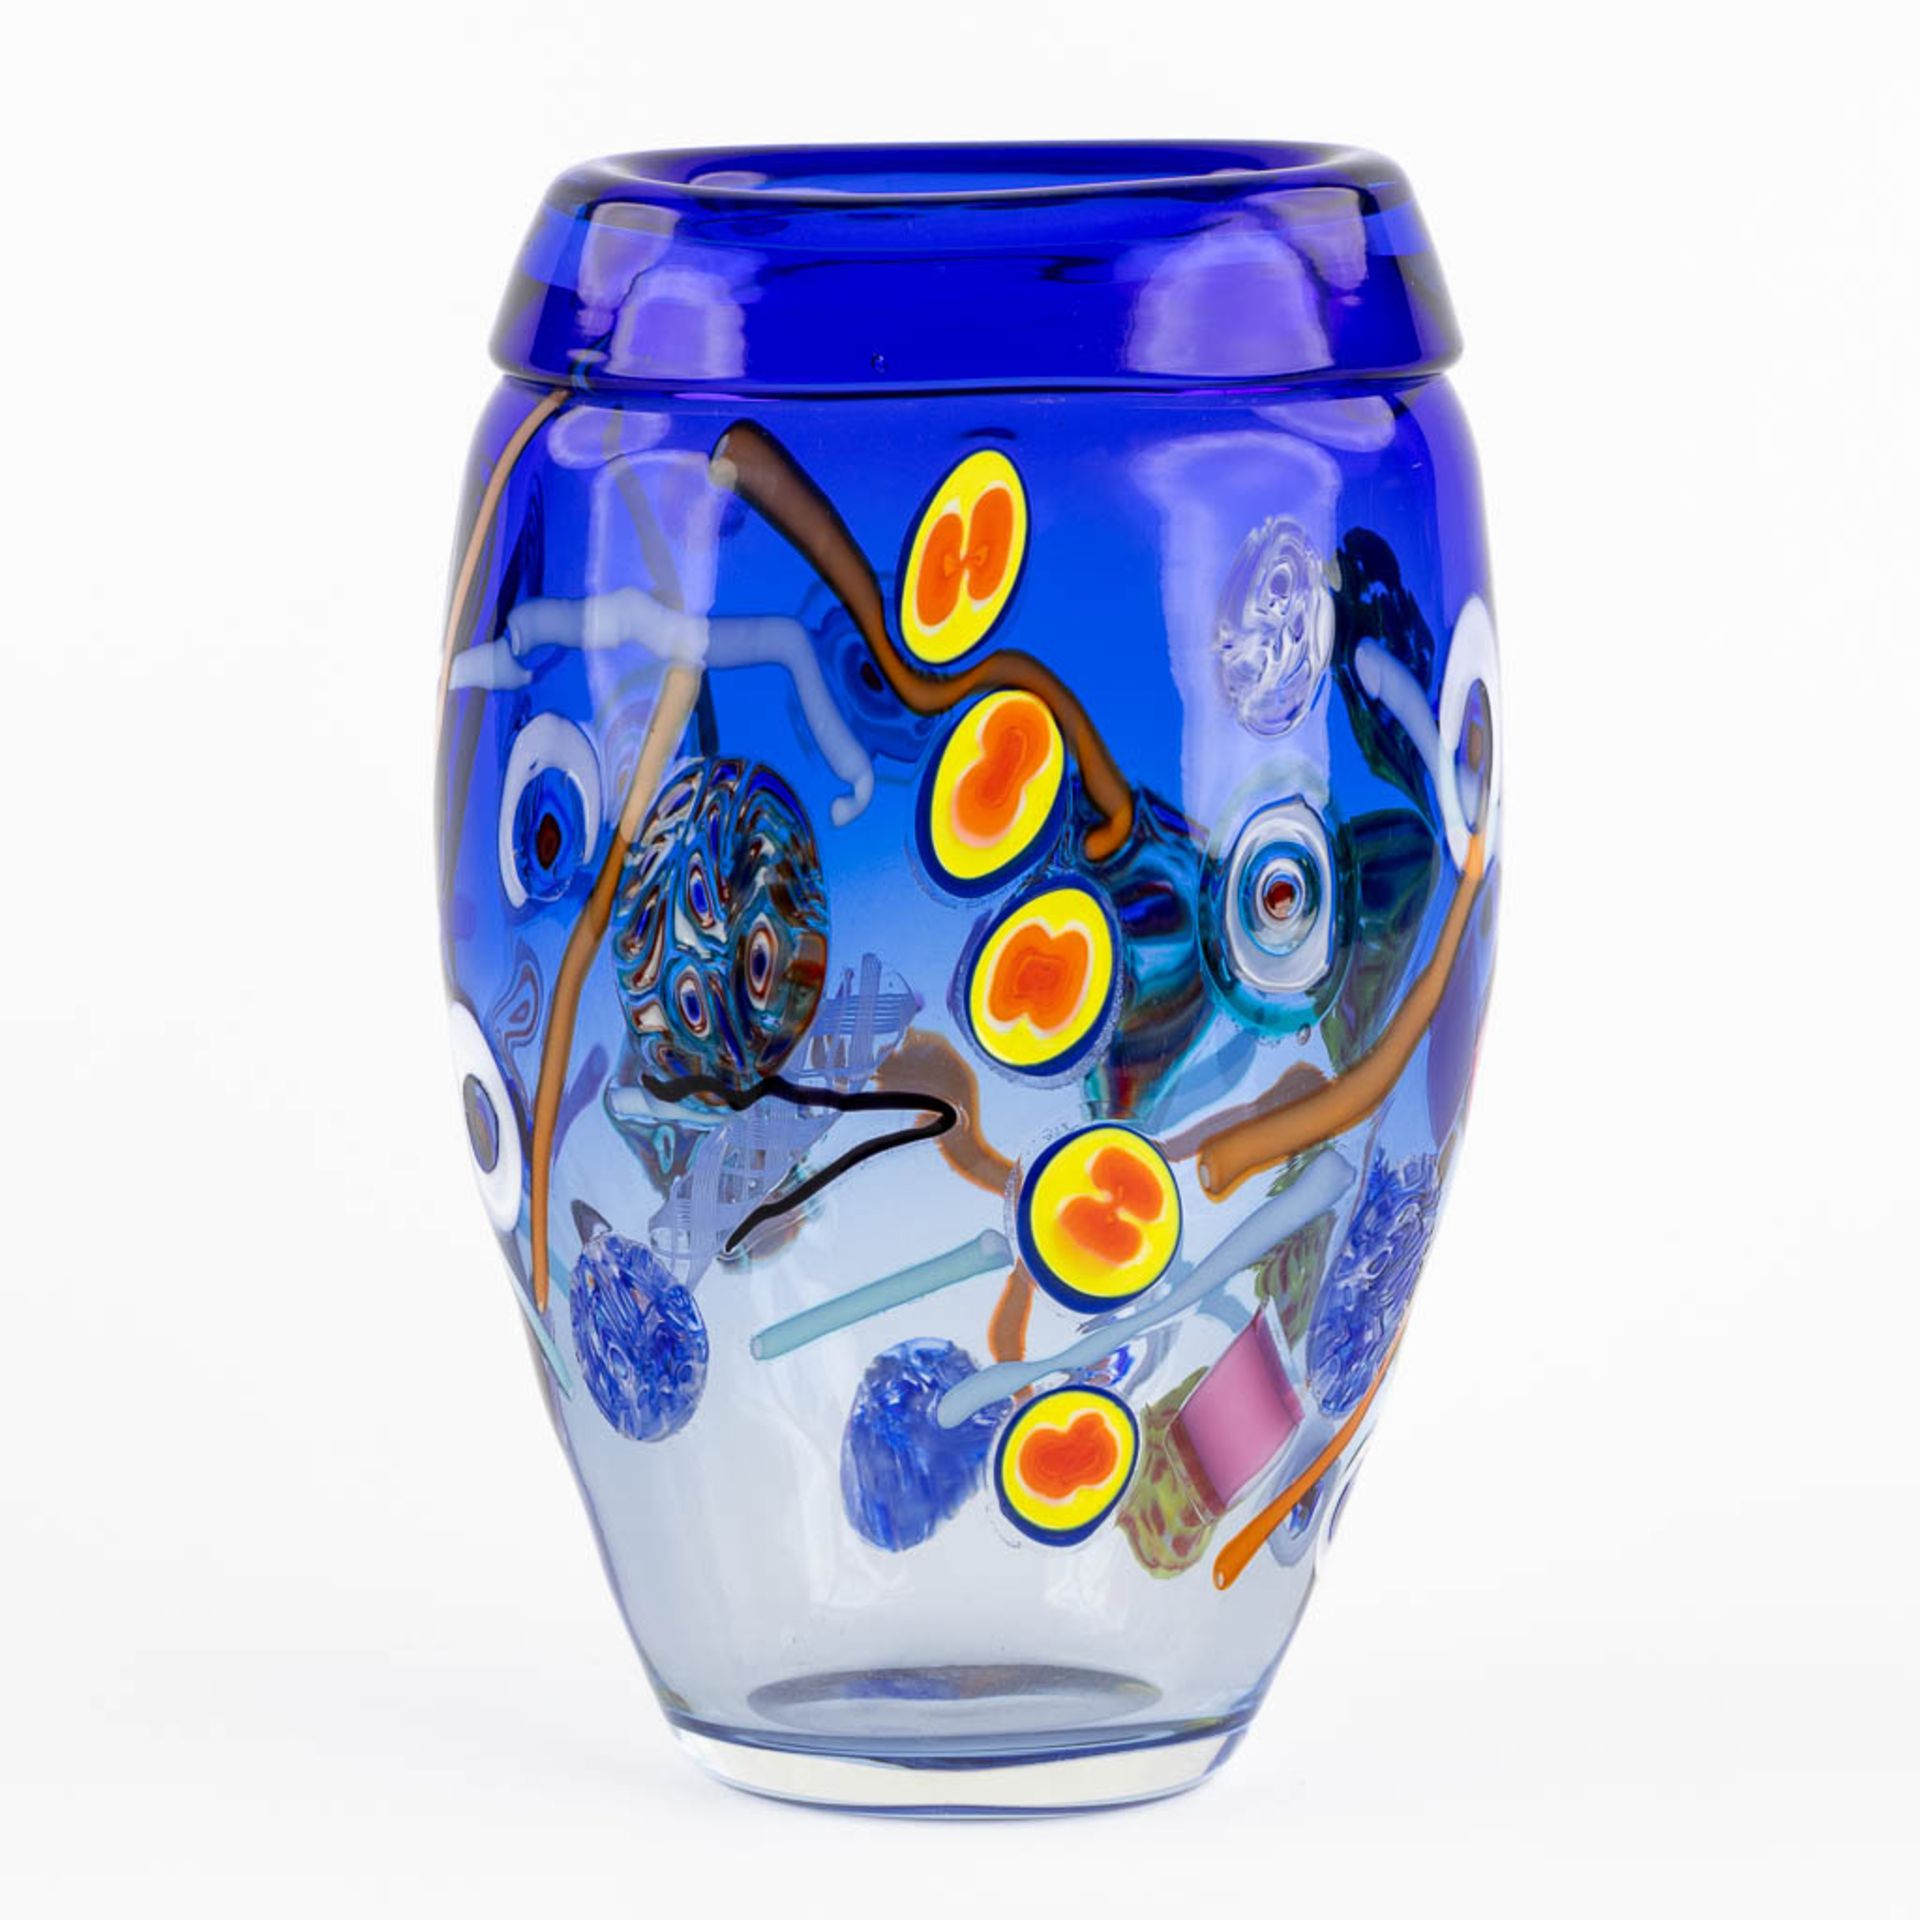 A mid-century vase with colorfull decor, Murano, Italy. 20th C. (L:13 x W:16 x H:25 cm) - Image 3 of 11